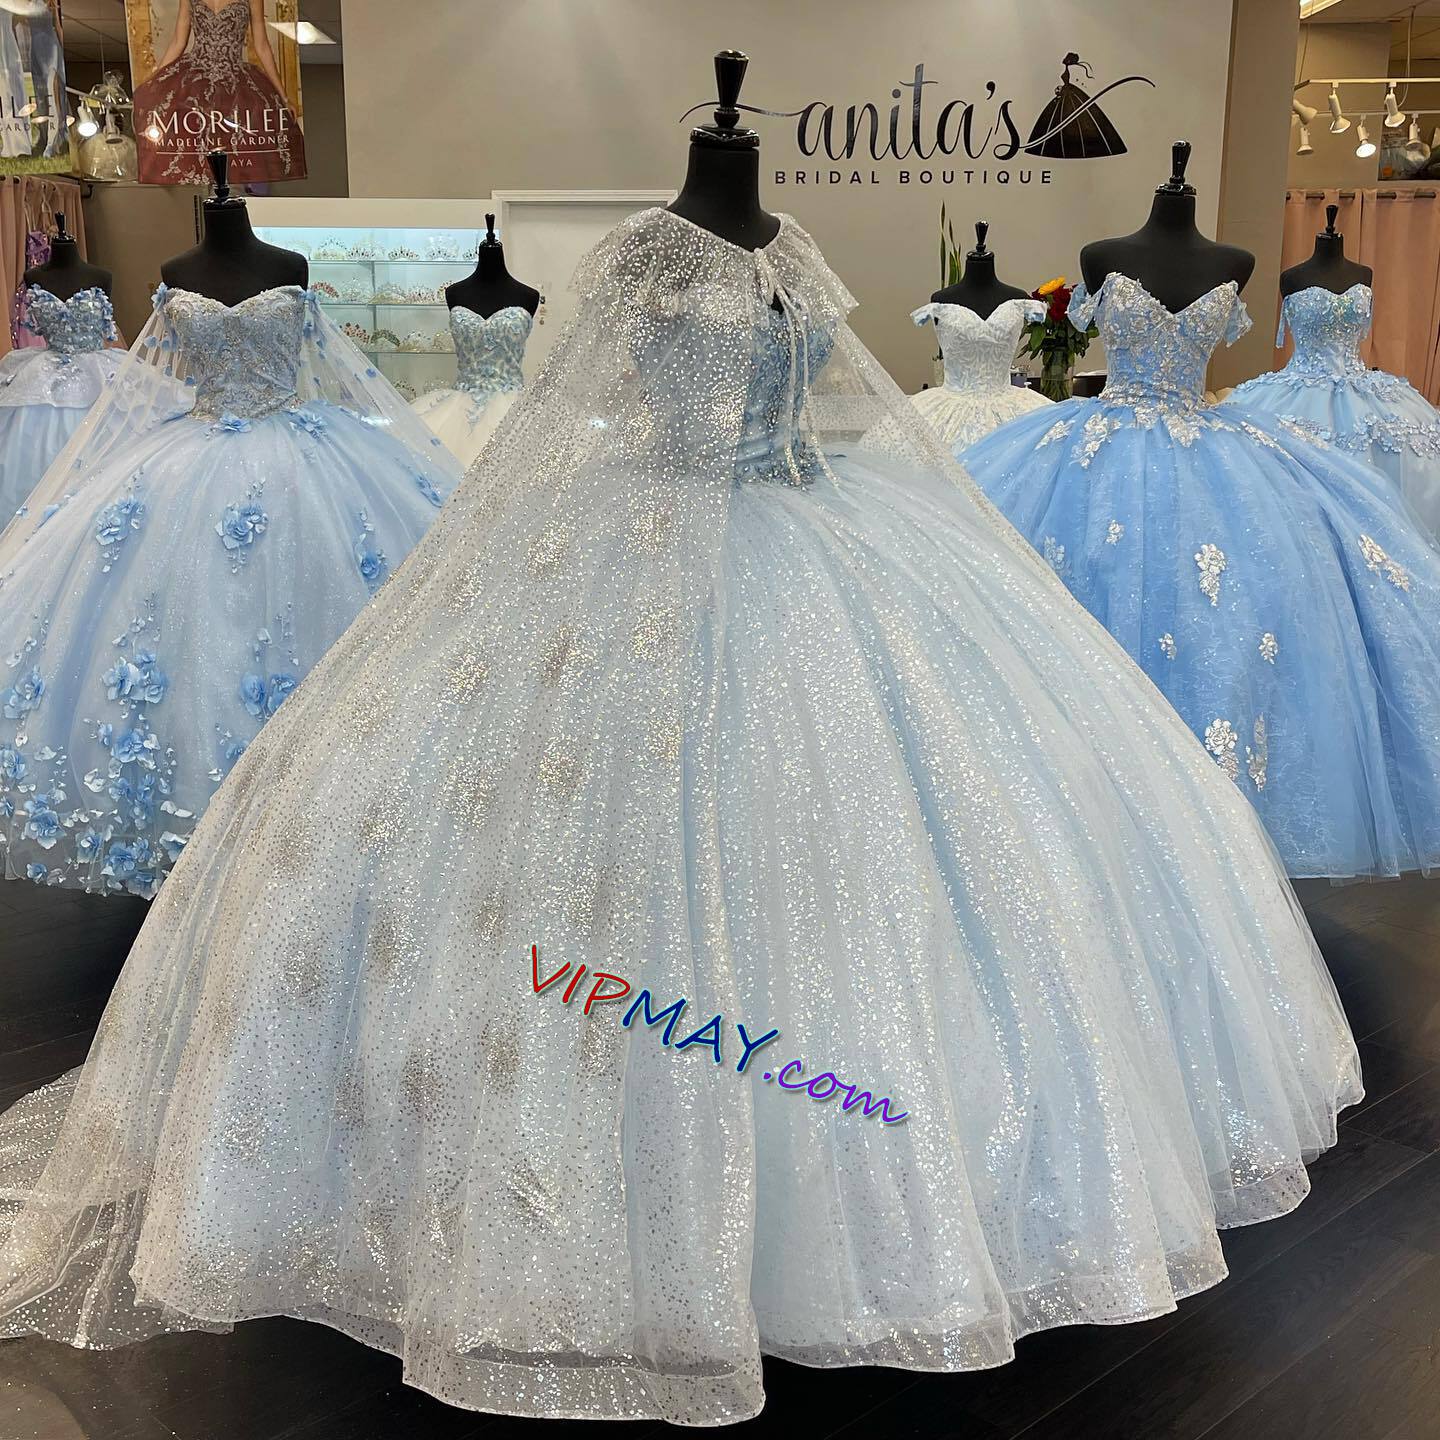 affordable quinceanera dress,glitter tulle quinceanera dress,strapless sweetheart quinceanera dress,sweetheart quinceanera dress,quinceanera dress with cape,cheap light blue formal dress,light blue quinceanera dress,wholesale quinceanera dress factory,corset quinceanera dress,